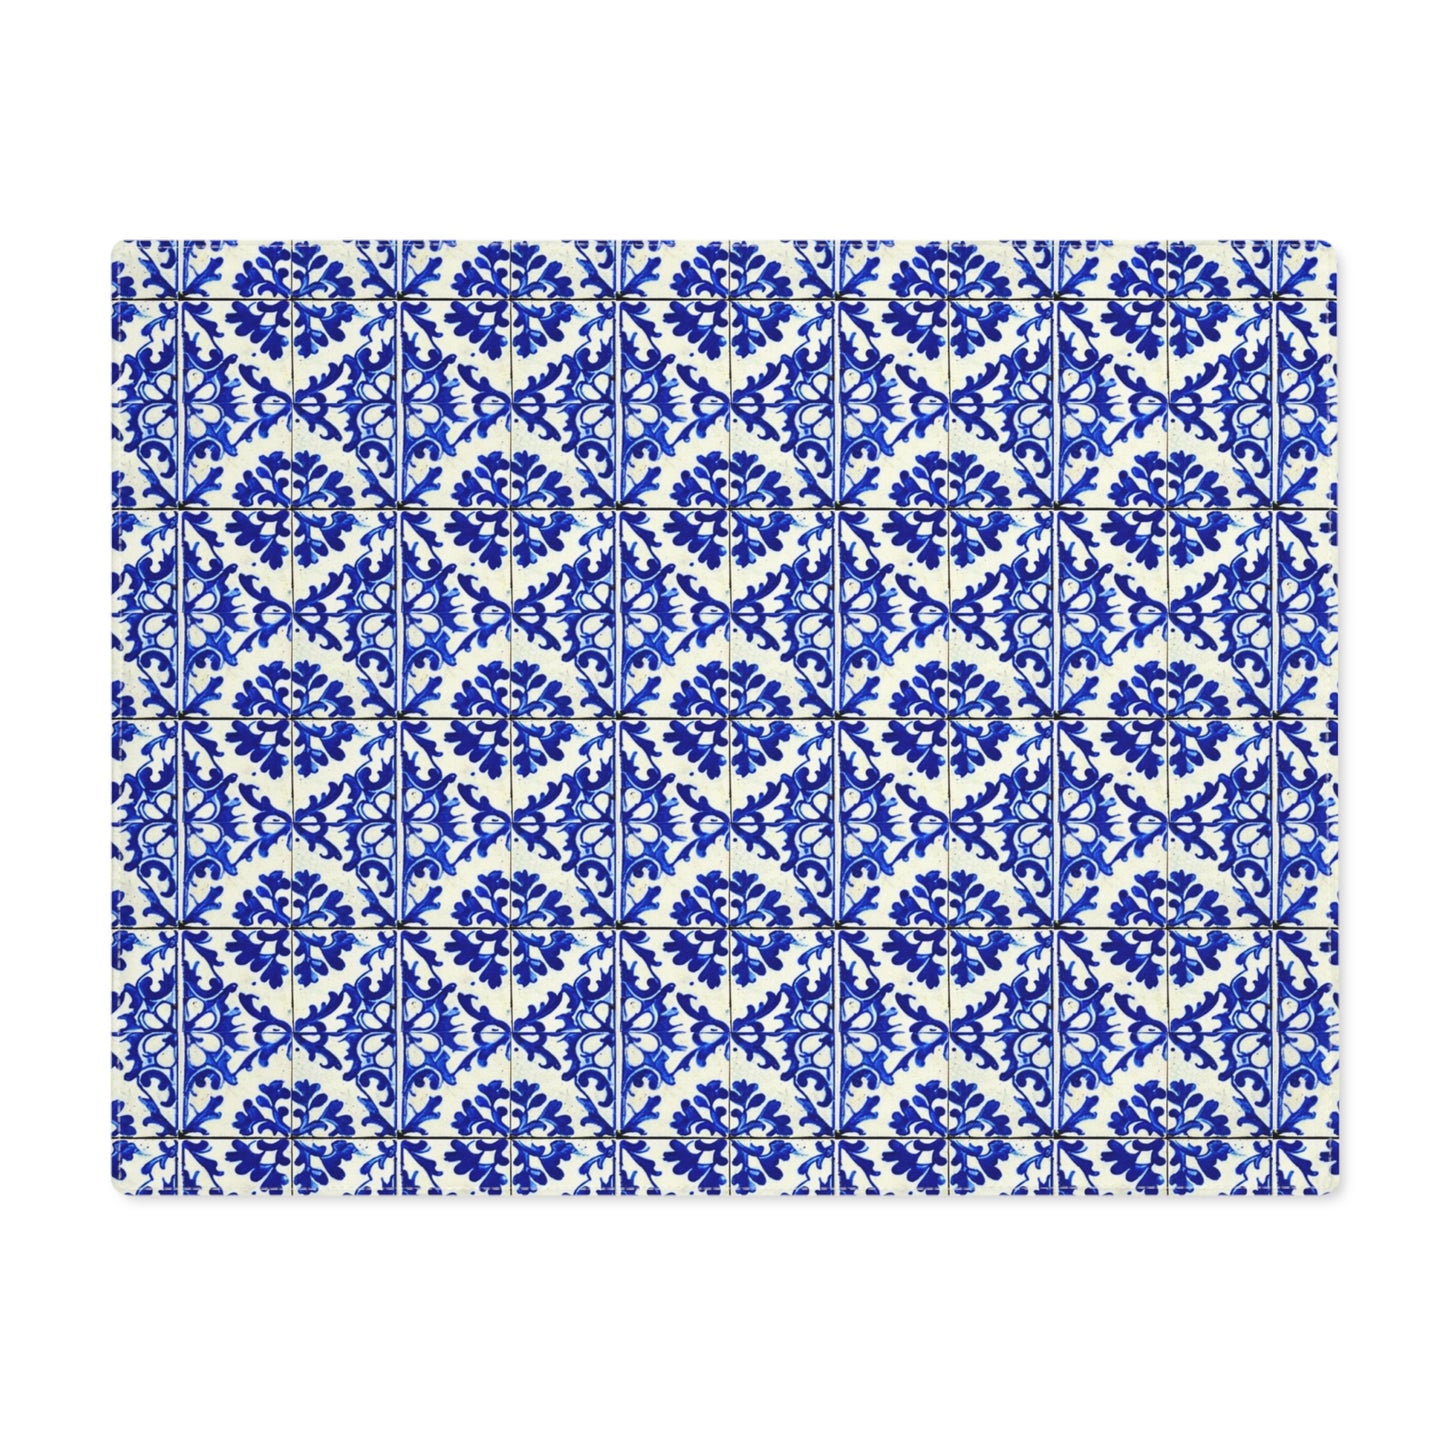 Portuguese Summer Blue and White Floral Antique Tile Entertaining Dinner Party Patio Indoor Outdoor Home Decor Placemat, 1pc